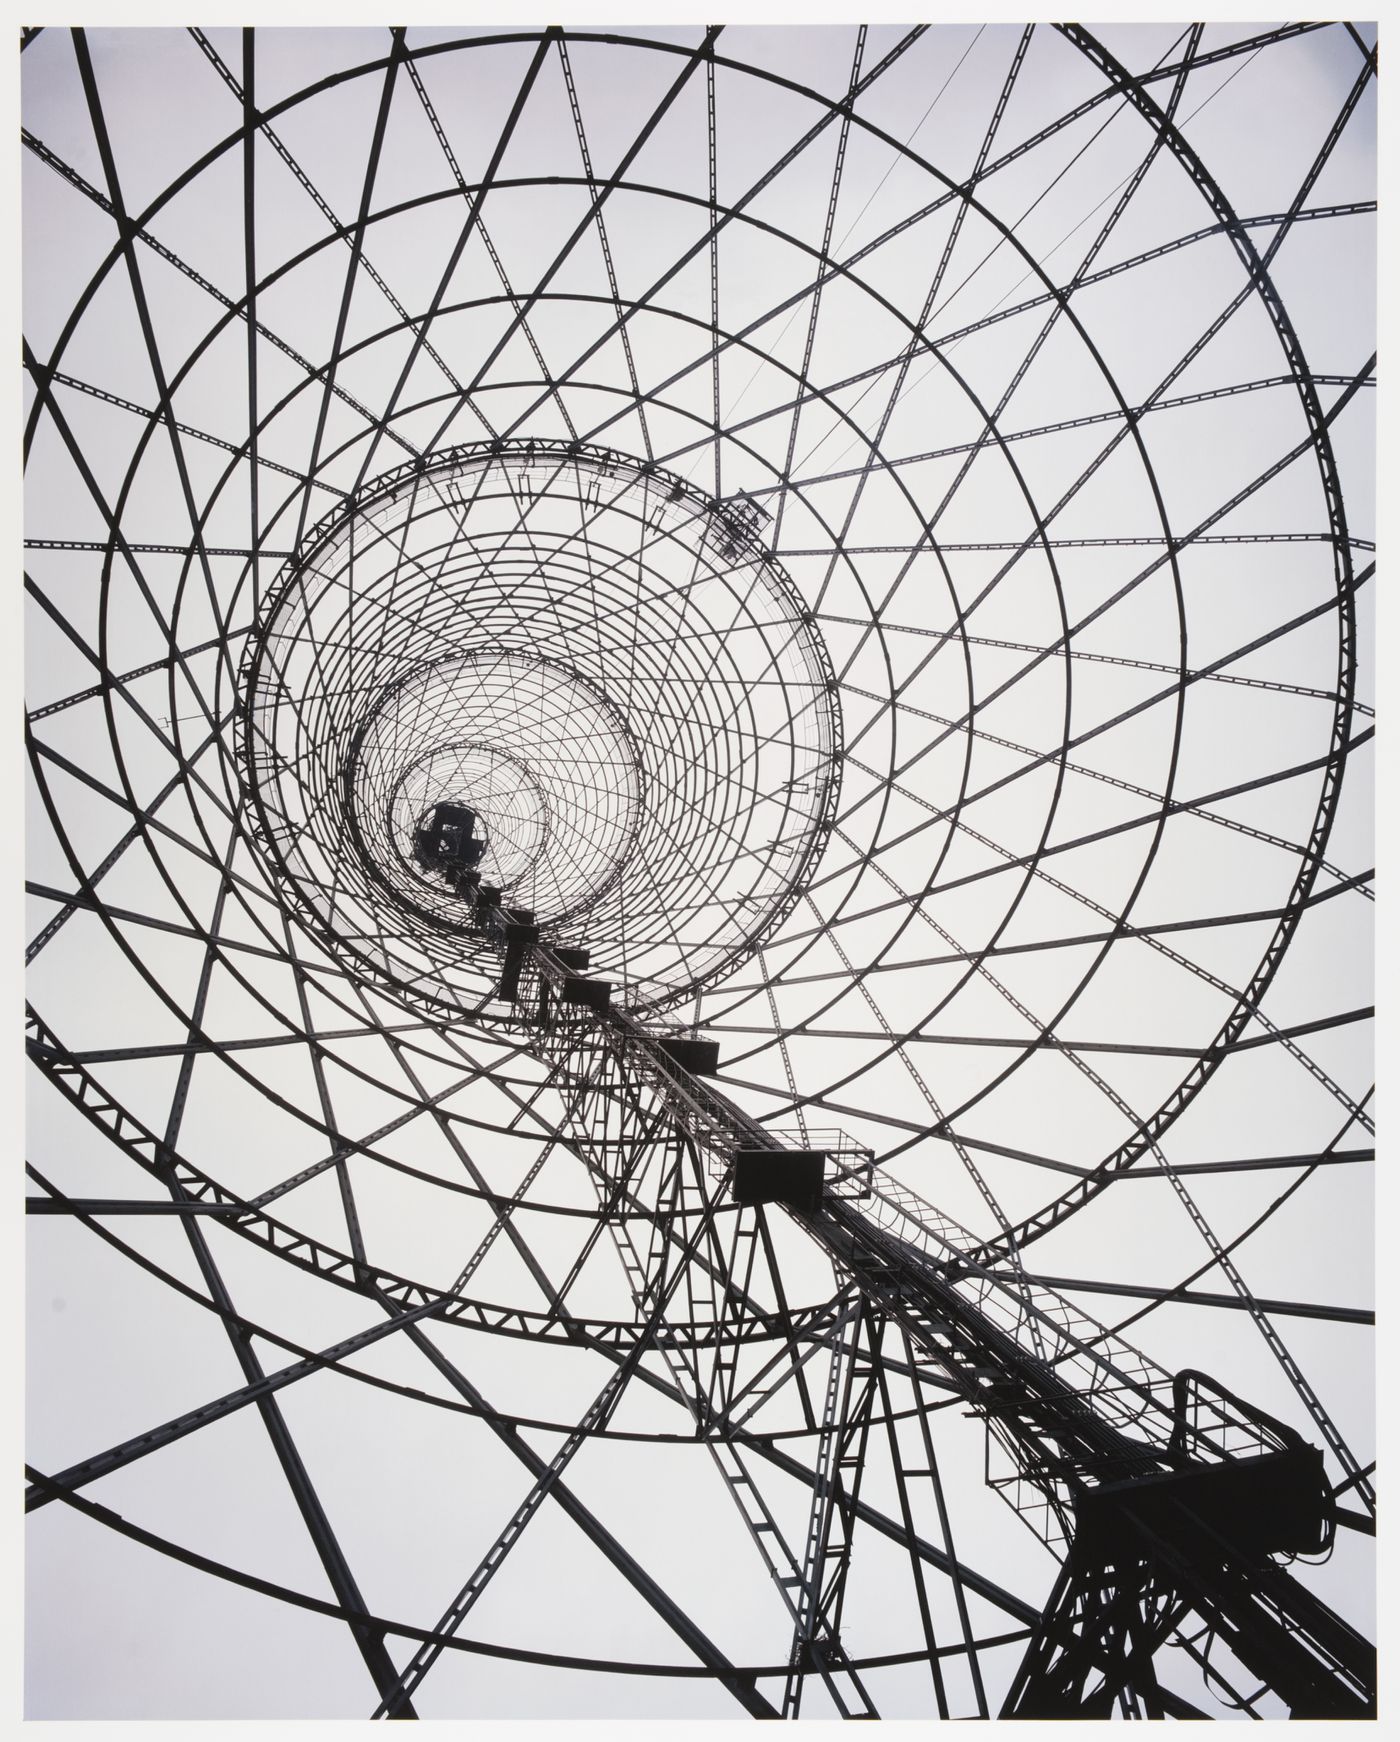 View of the Shabolovka Radio Tower (also known as Shukhov Tower), Moscow, Russia